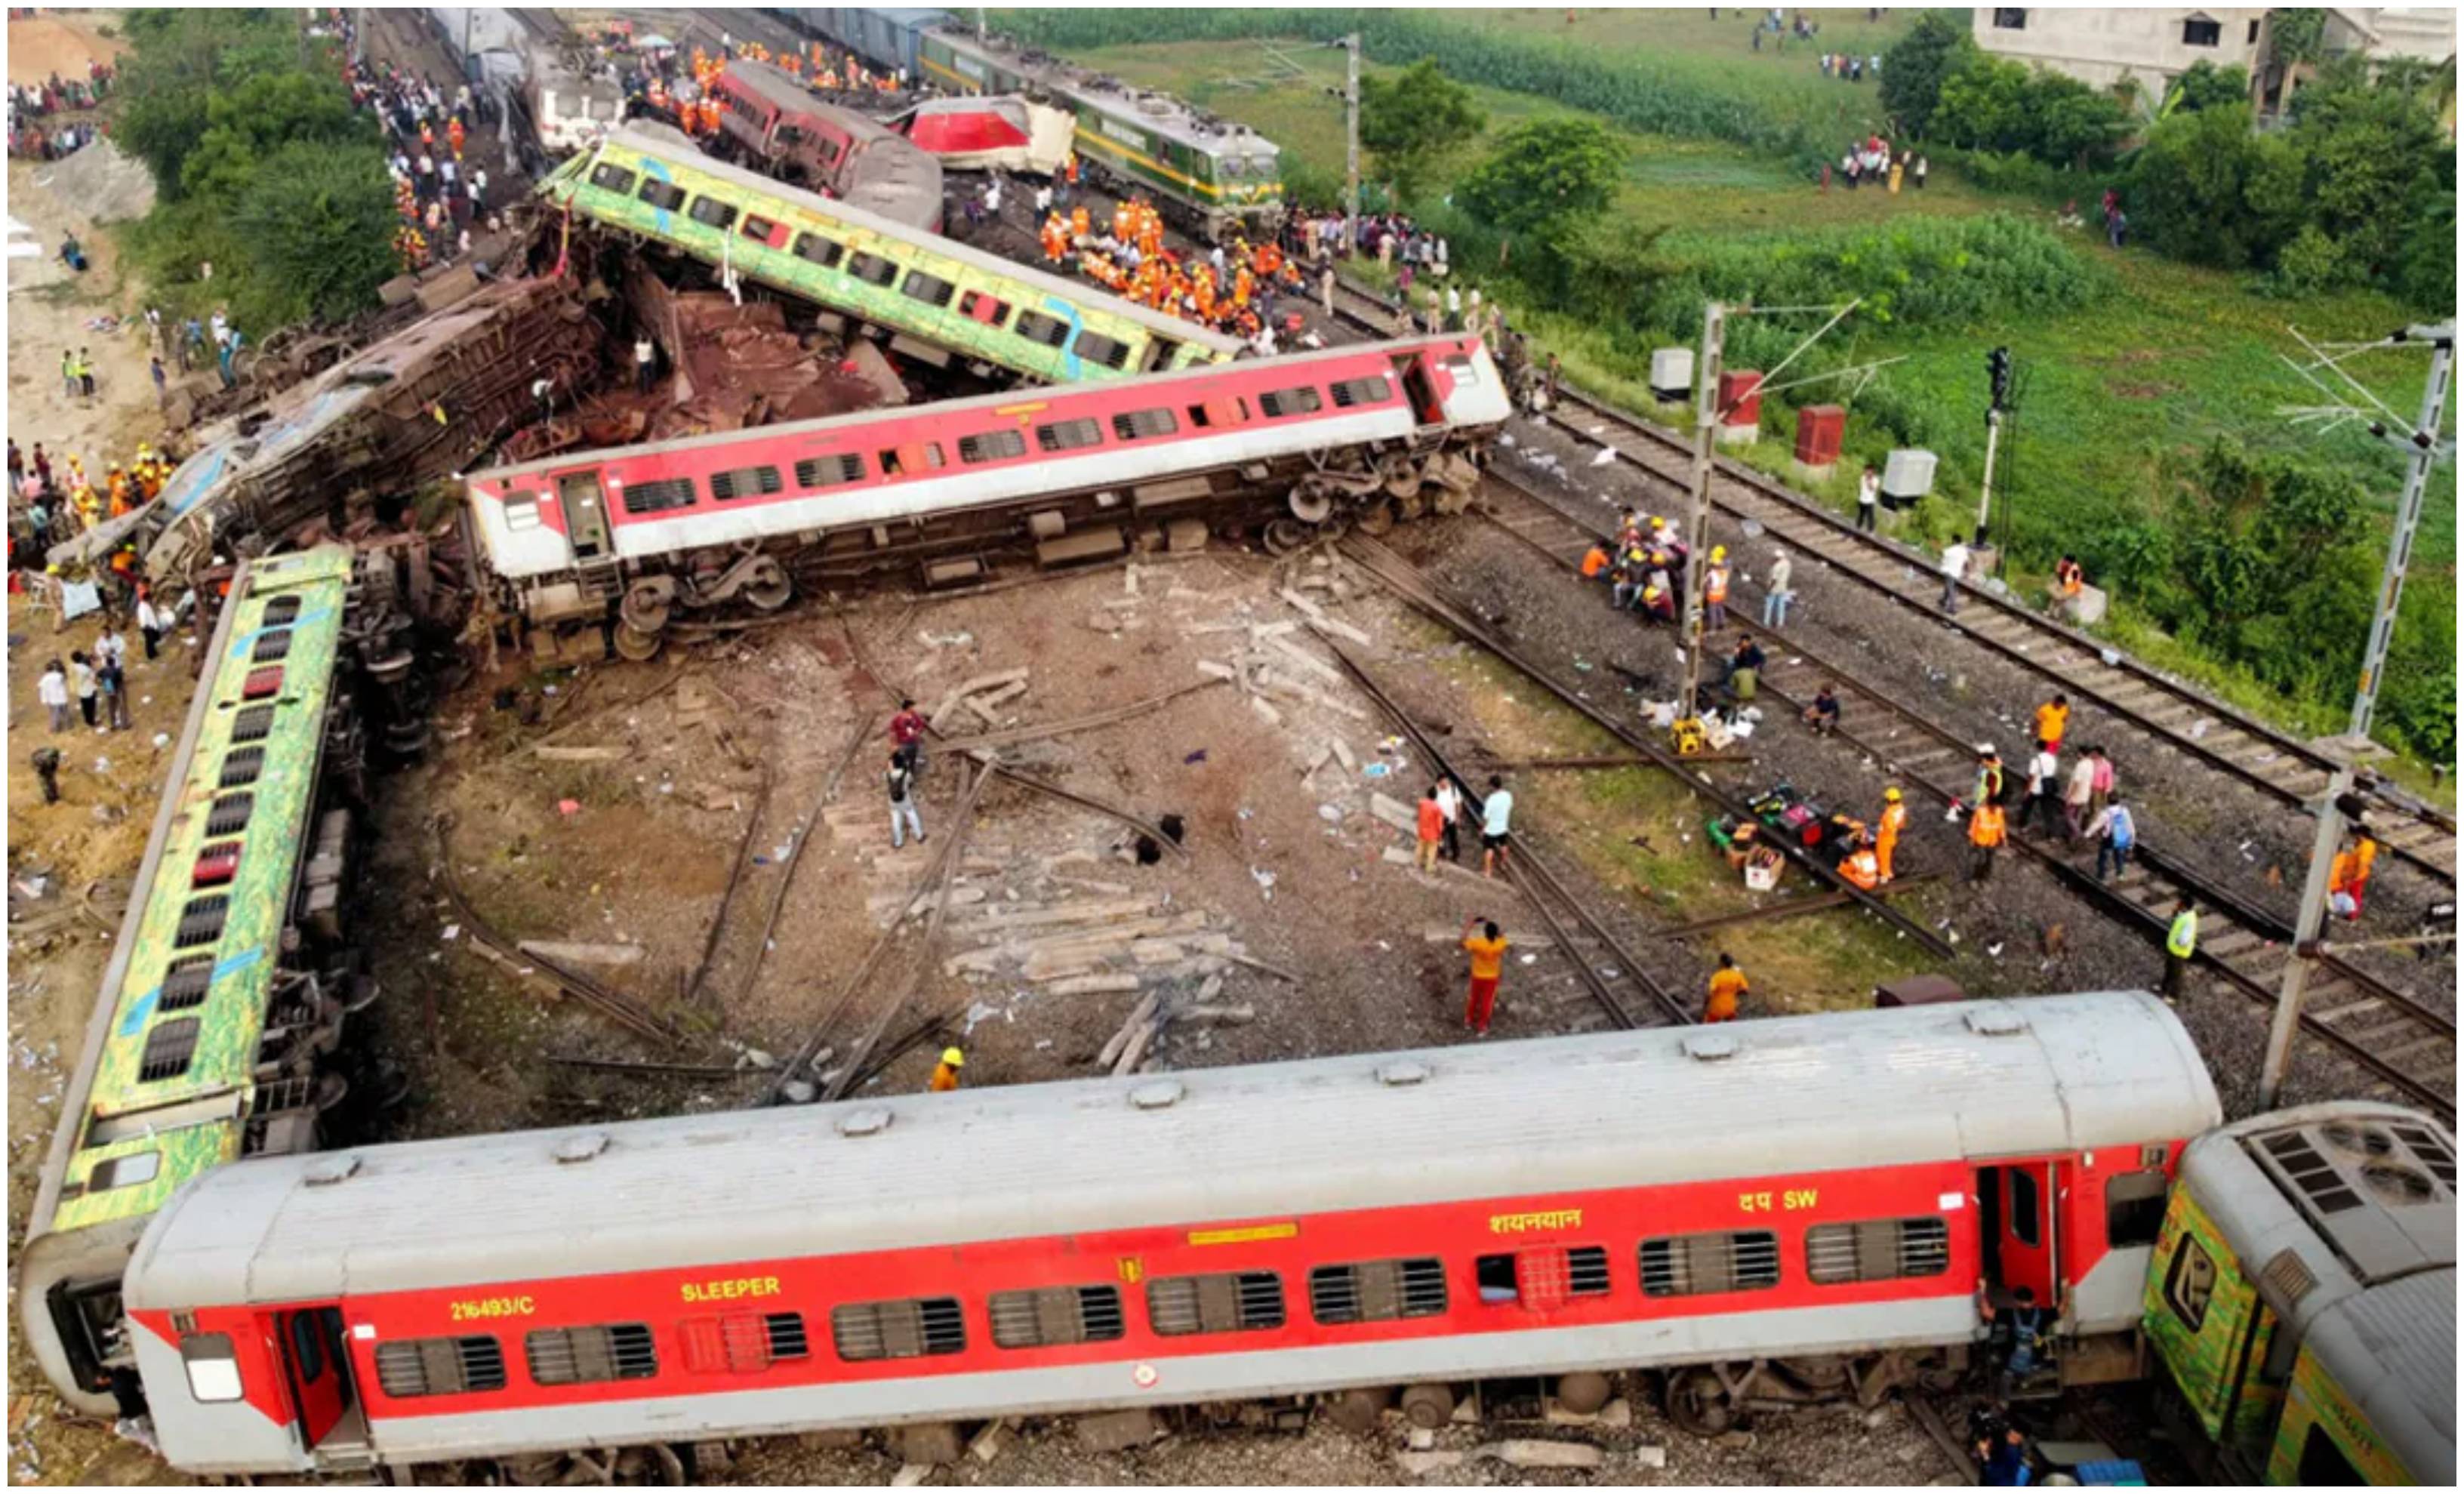 Visual of the horrific train accident | Reuters